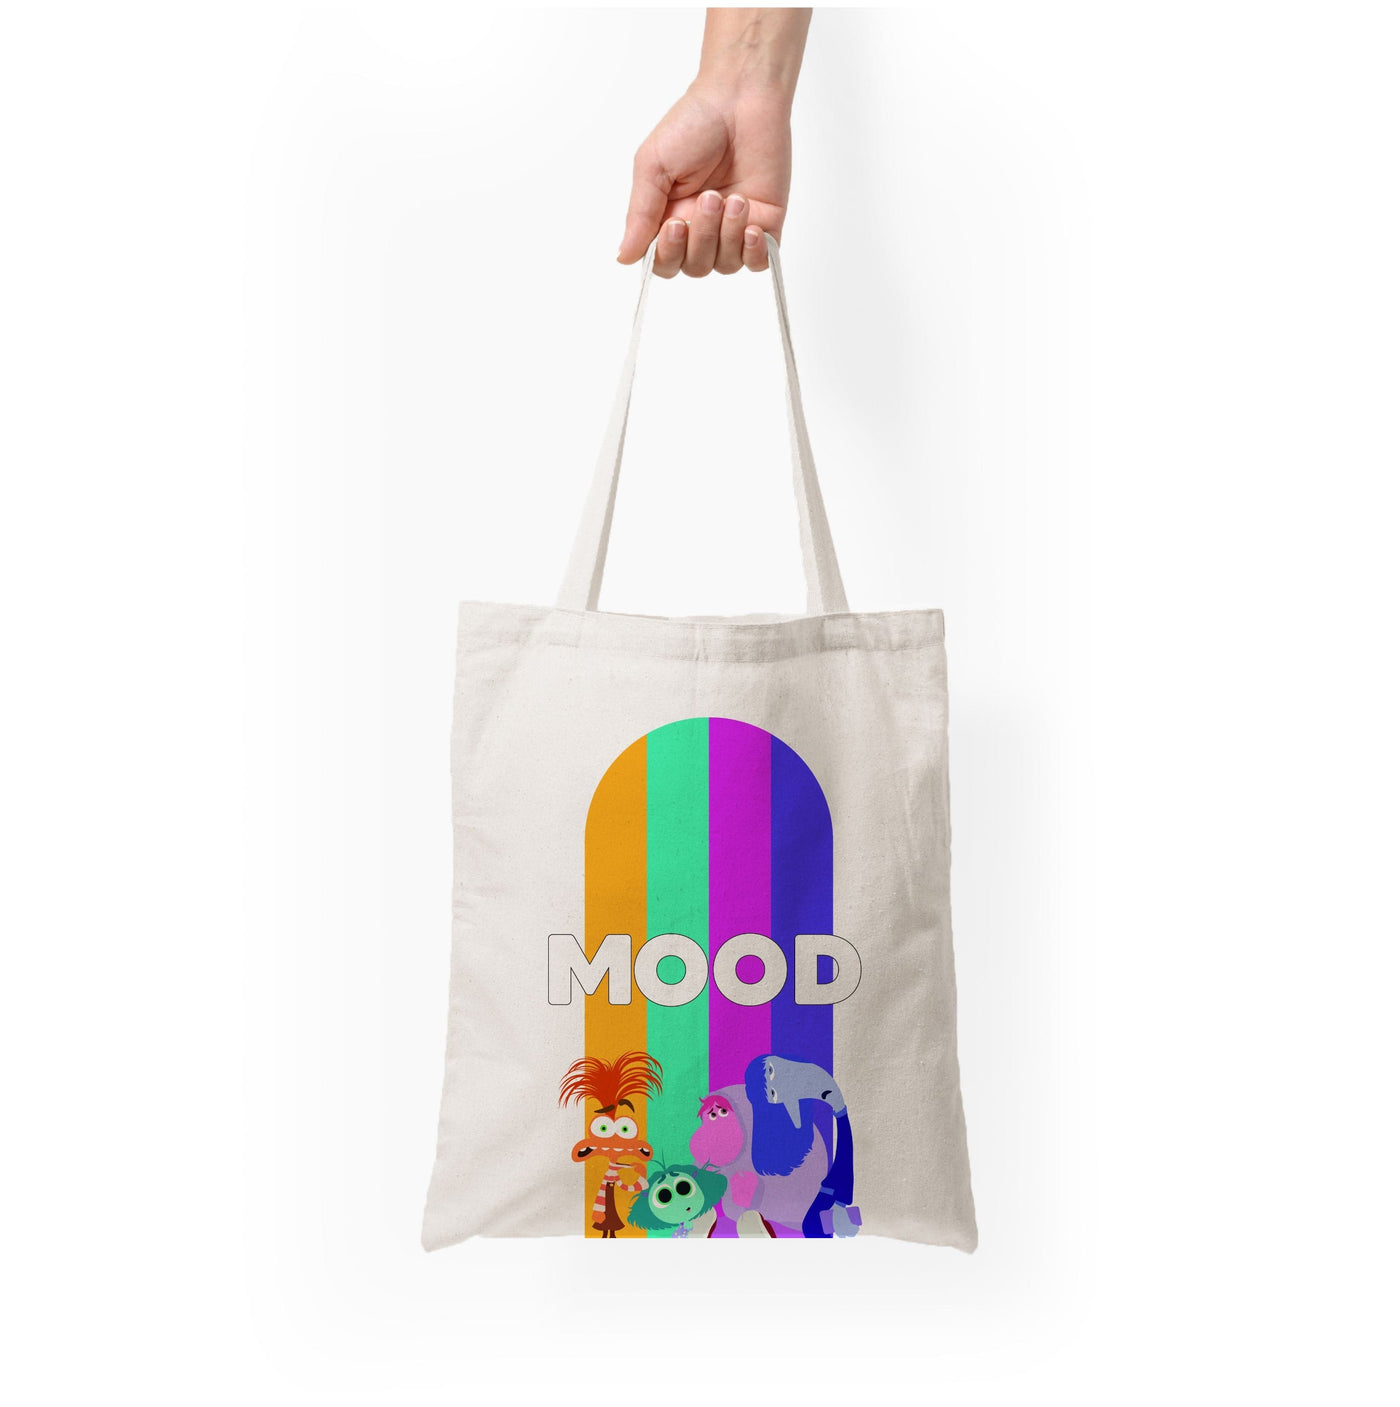 Mood - Inside Out Tote Bag